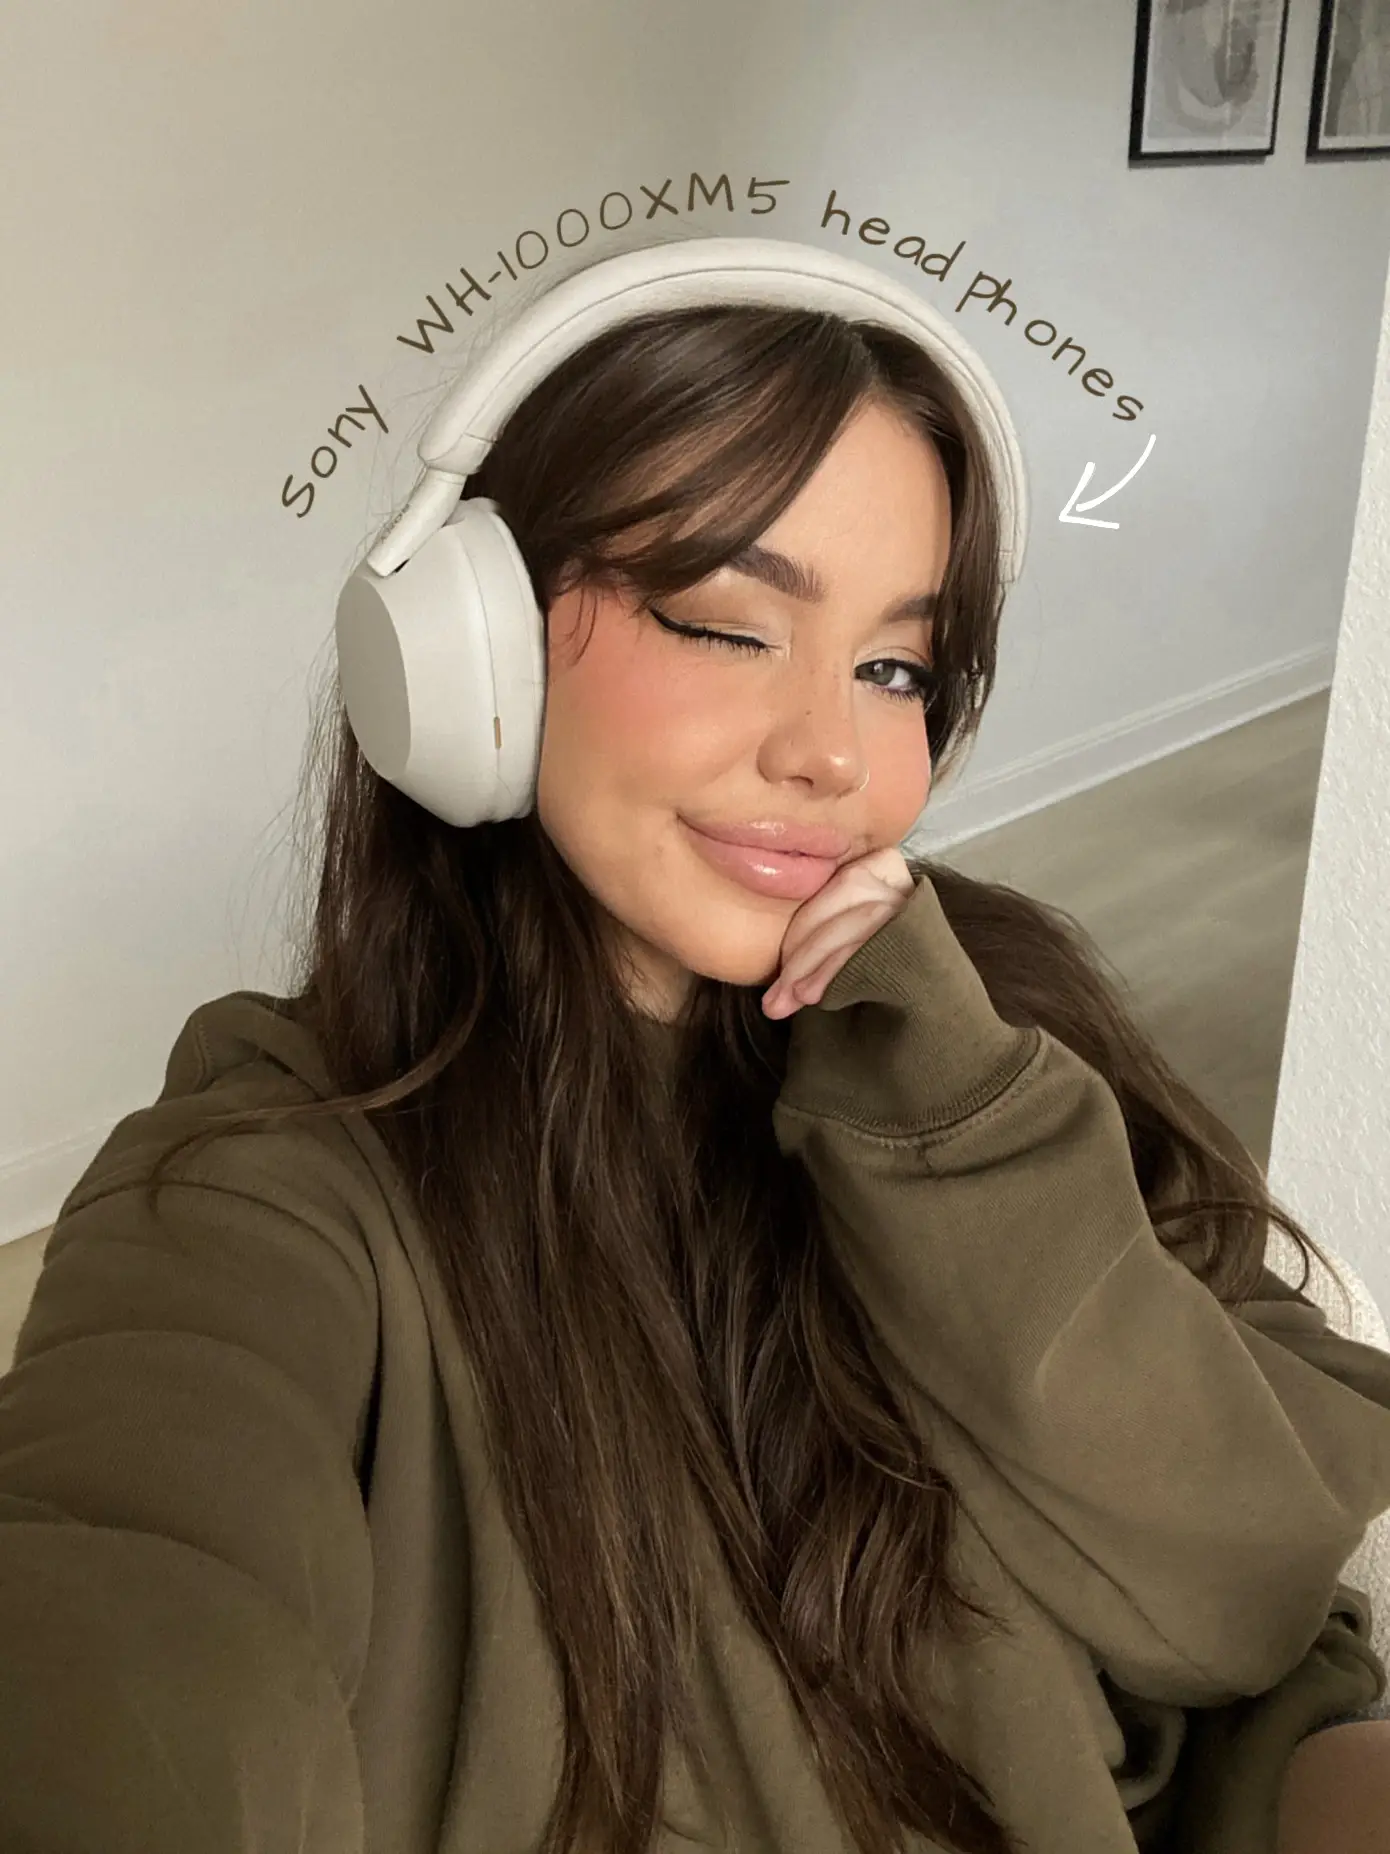 Sony WH-1000XM5 headphones 🎧 | Gallery posted by hailie | Lemon8